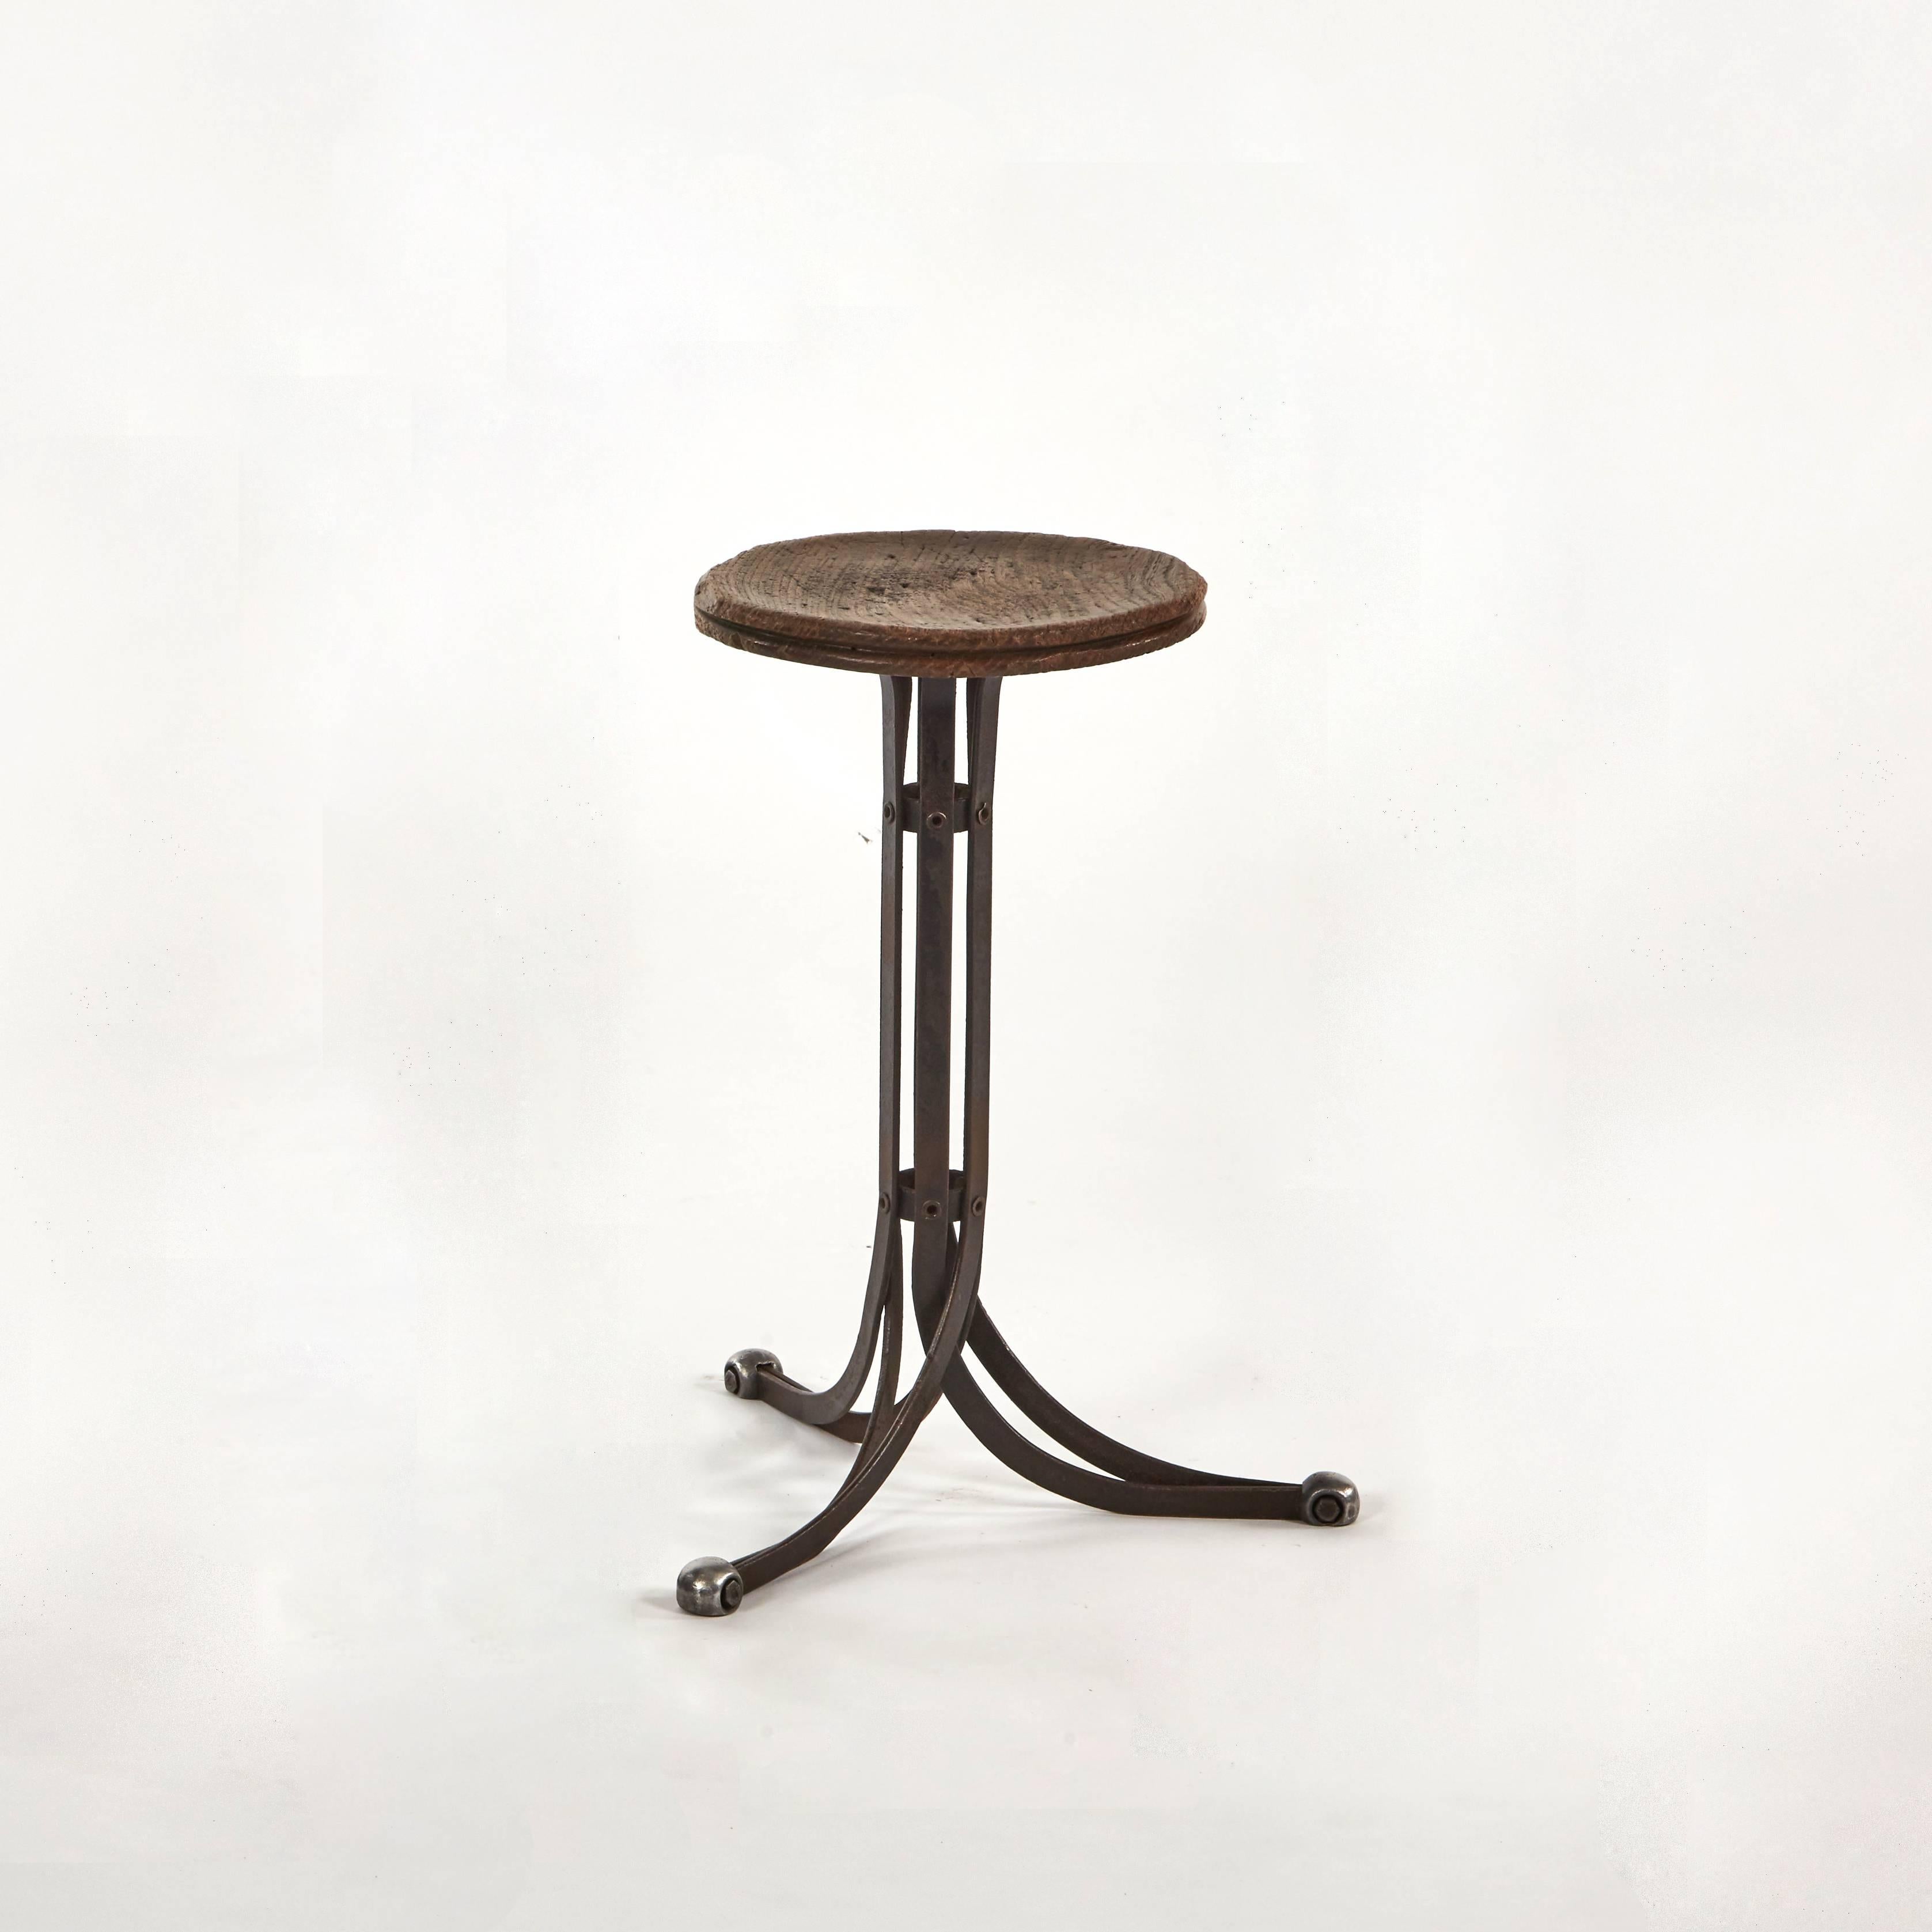 An Industrial stool with metal tripod base.